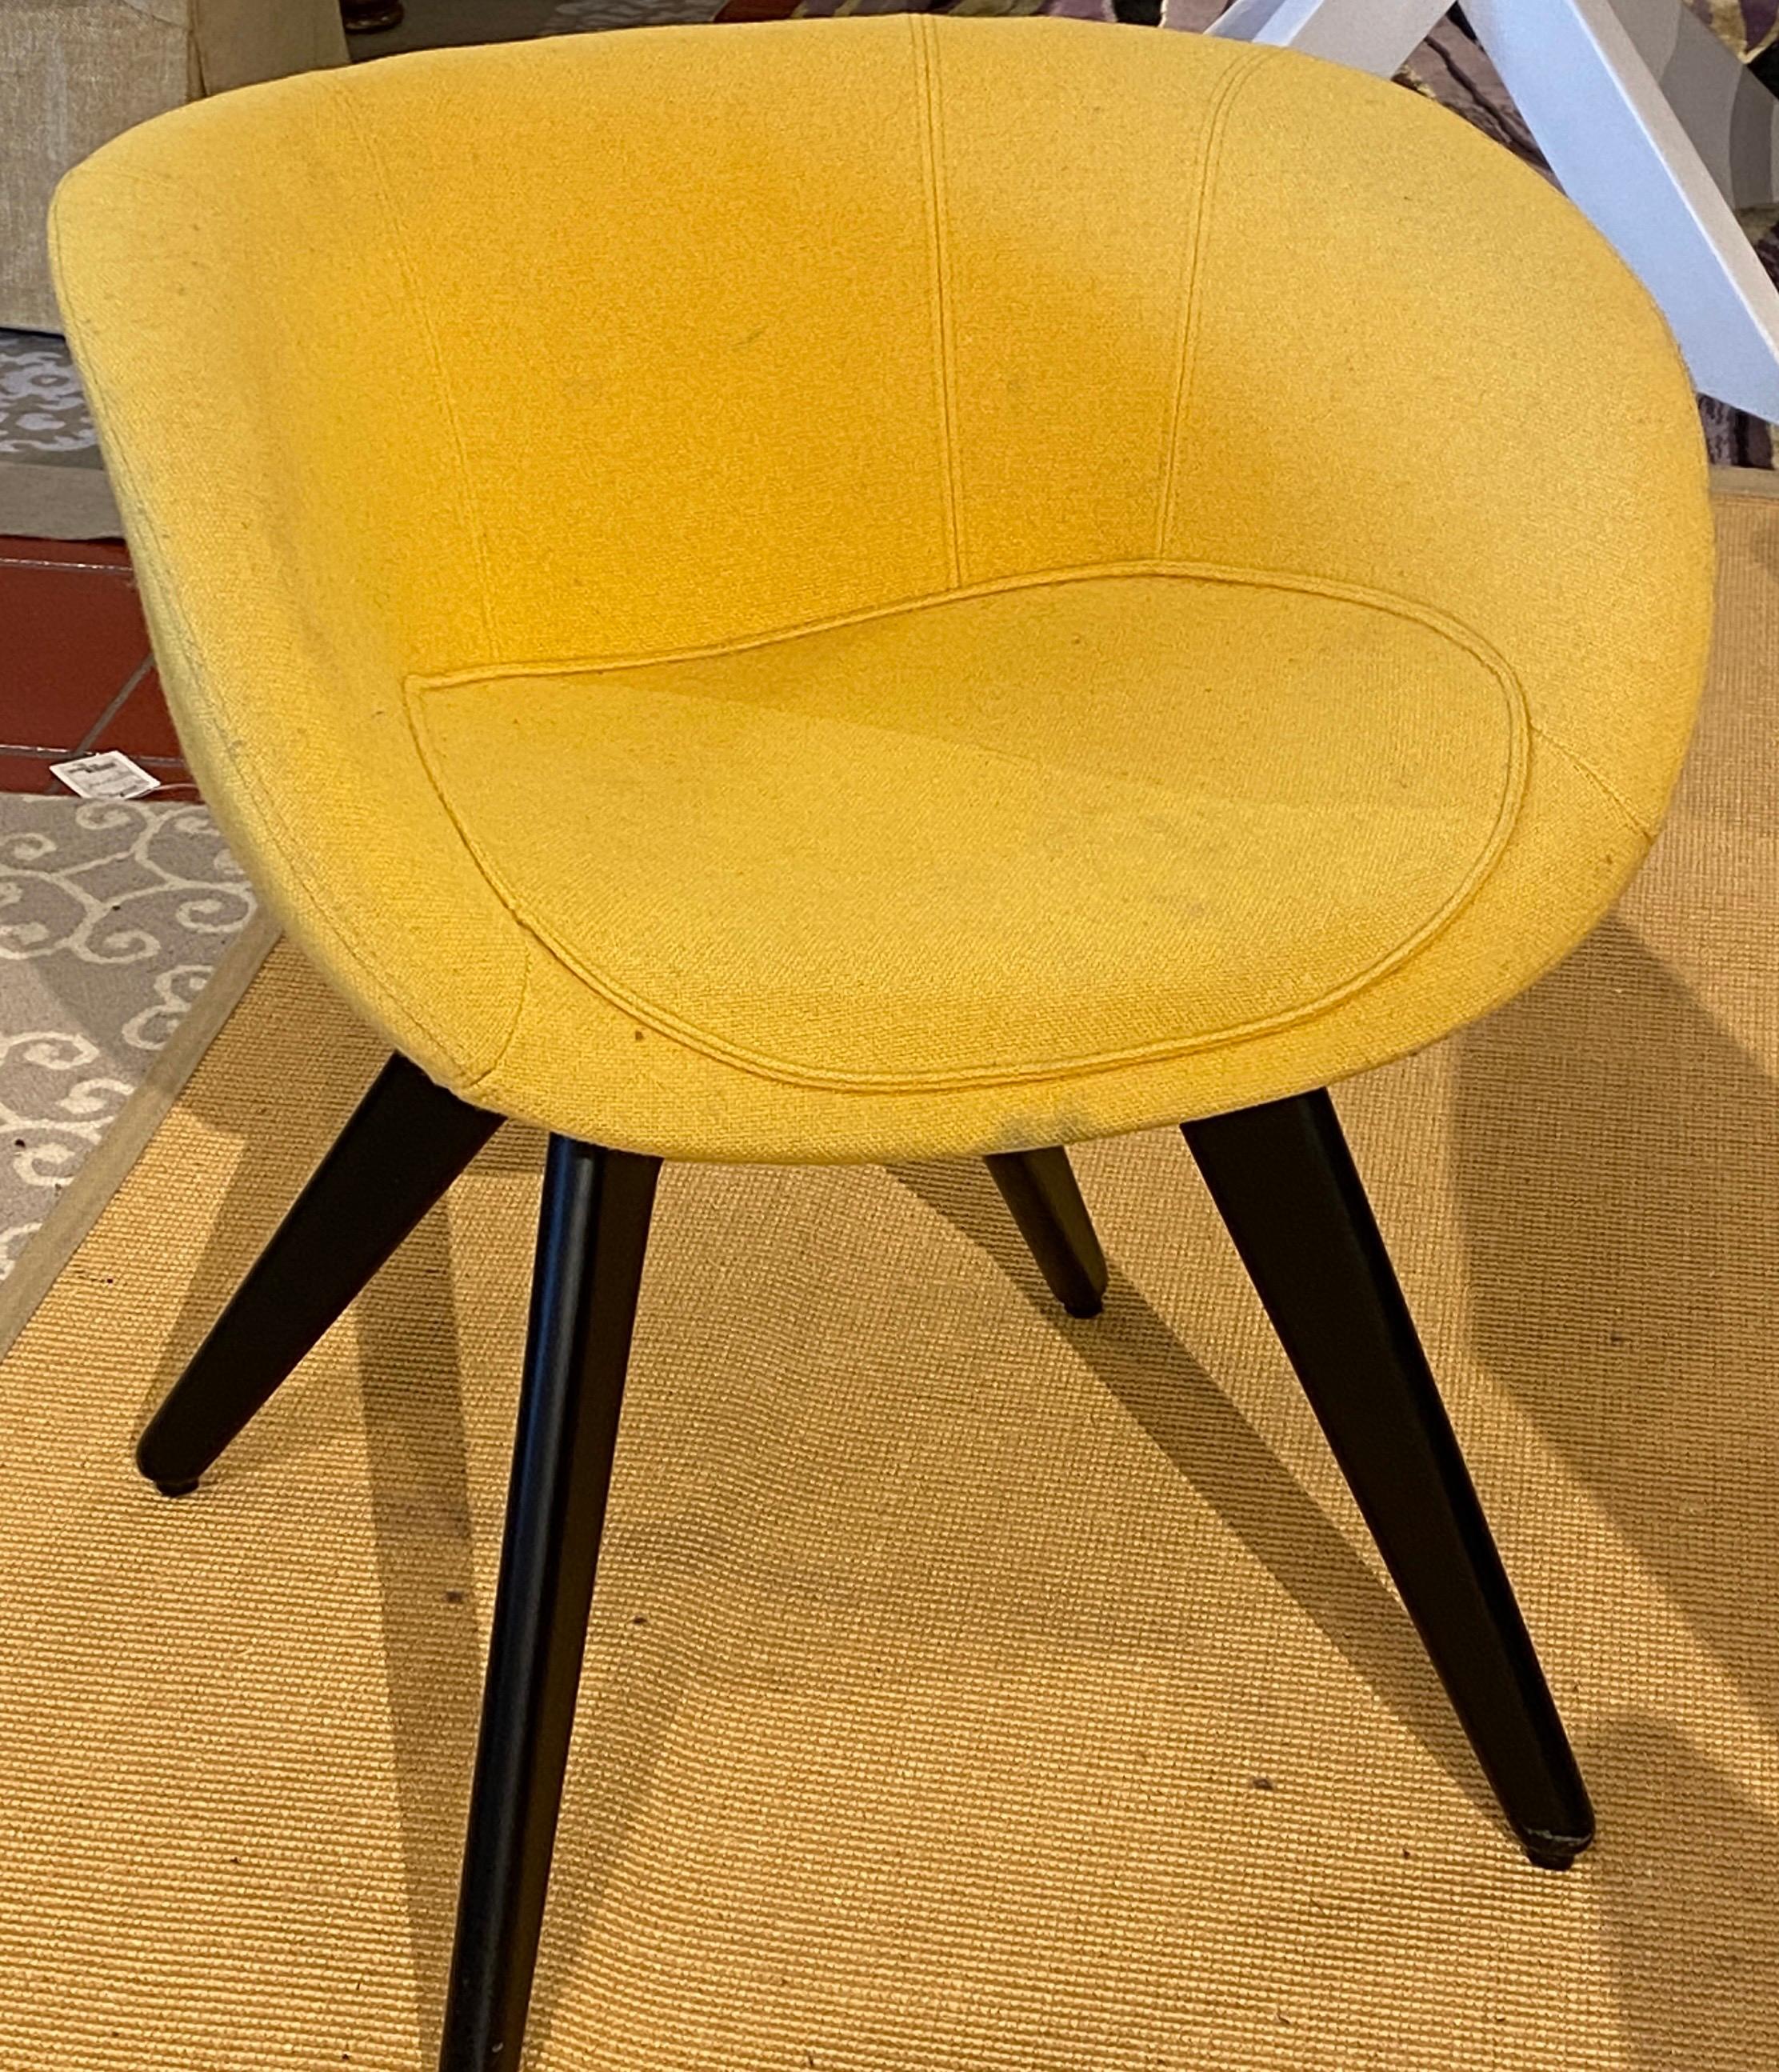 Set of 6 Tom Dixon Custom Upholstered Yellow Scoop chairs.

Fabric has stains as seen in photos.